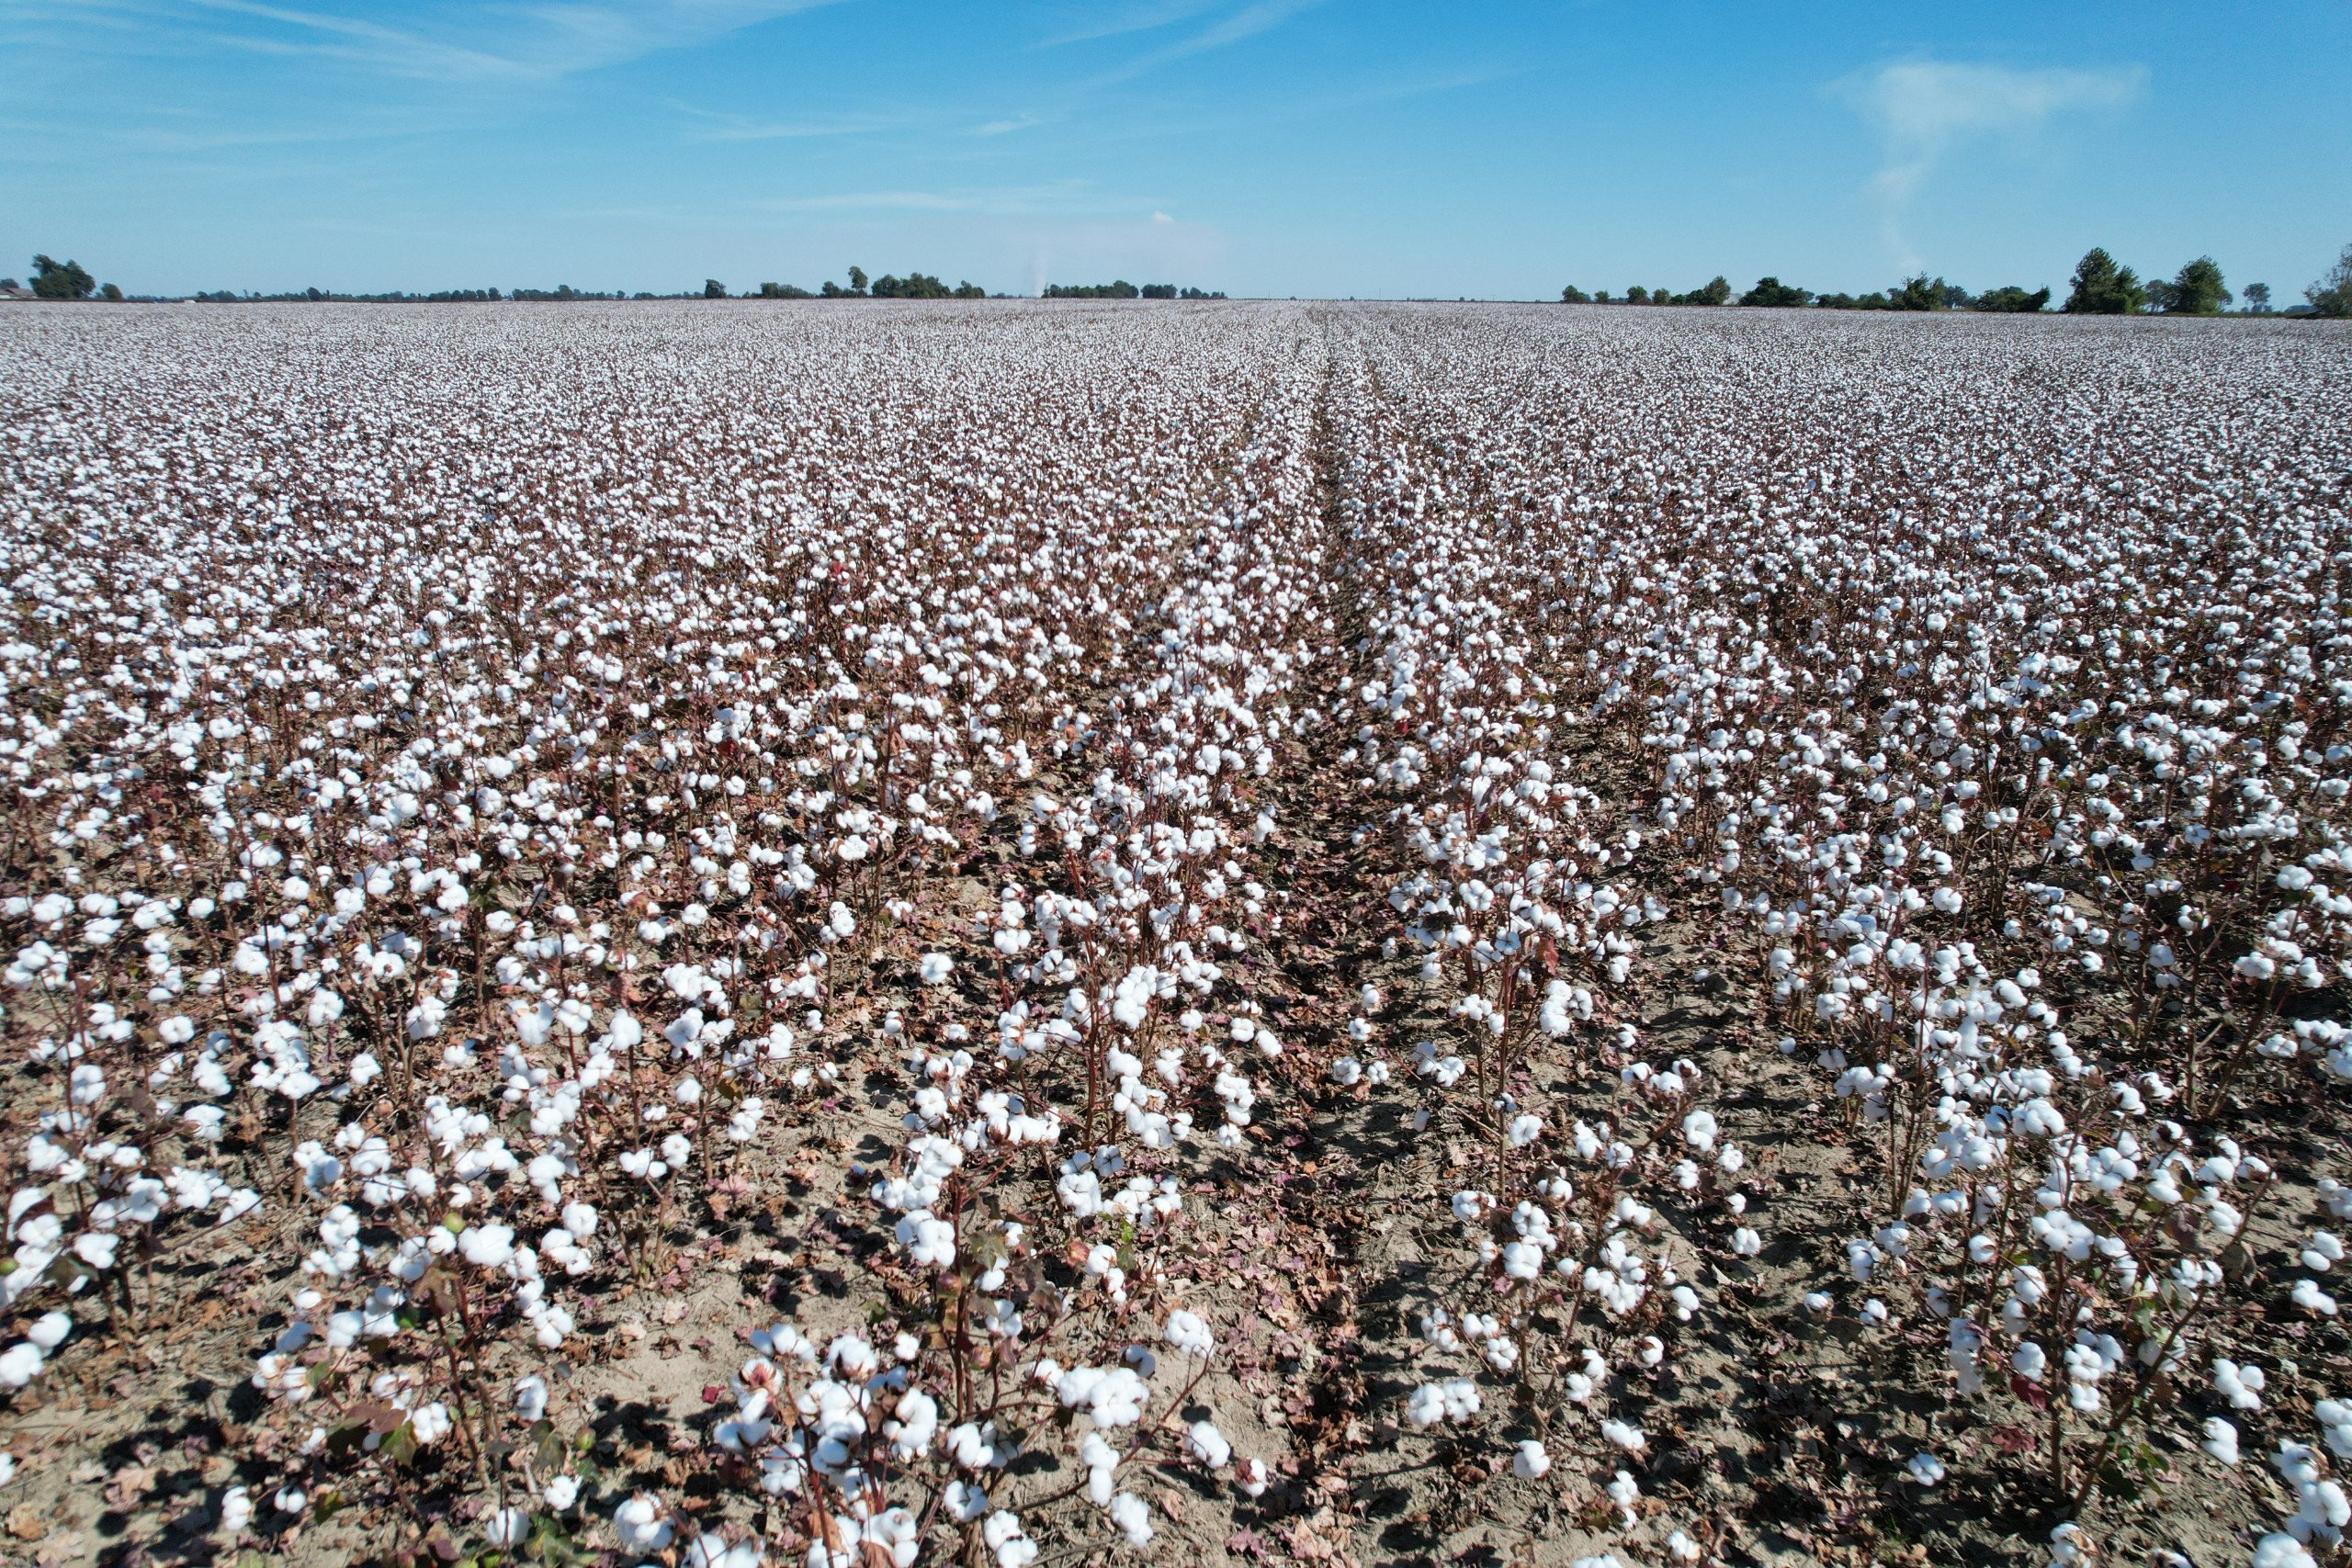 Cotton in Full Bloom